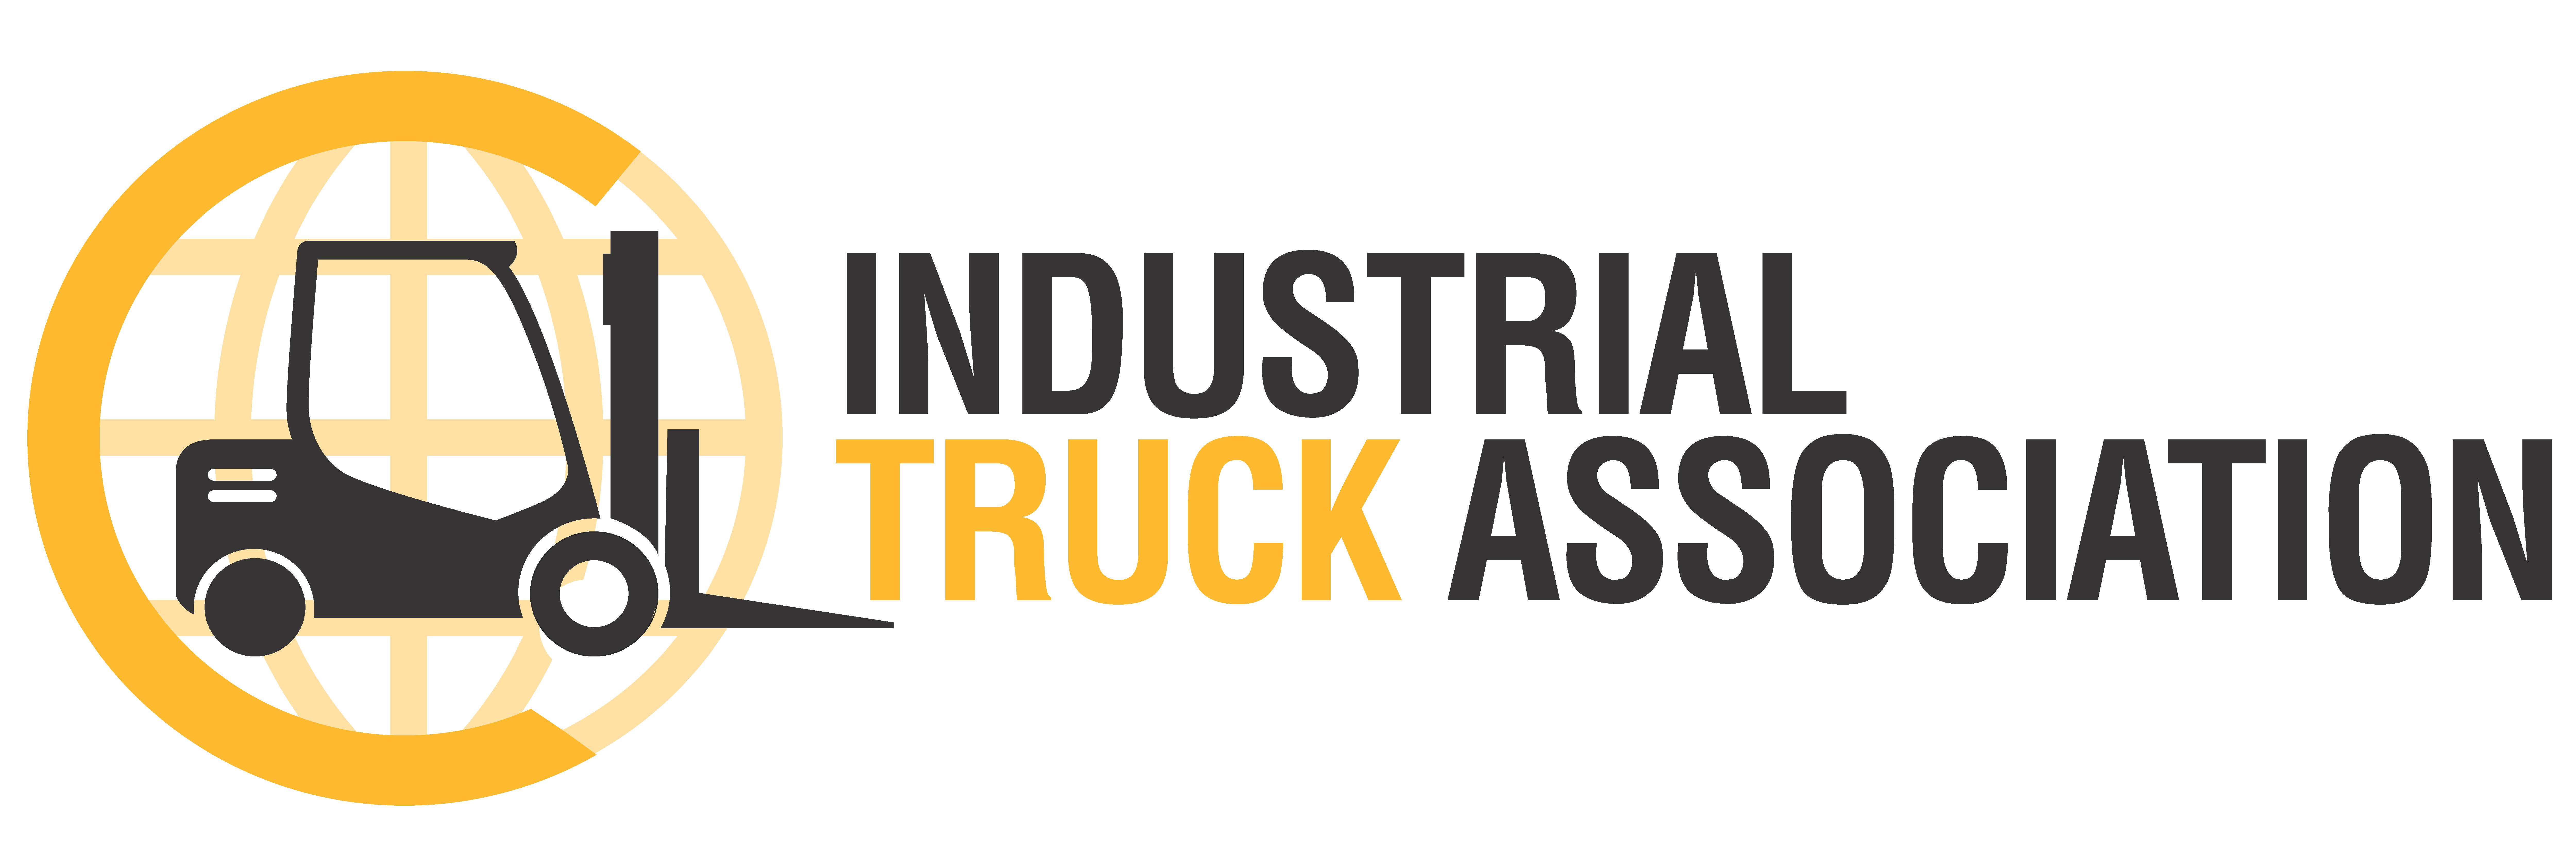 The Industrial Truck Association is the leading organization of industrial truck manufacturers and suppliers of component parts and accessories that conduct business in North America.